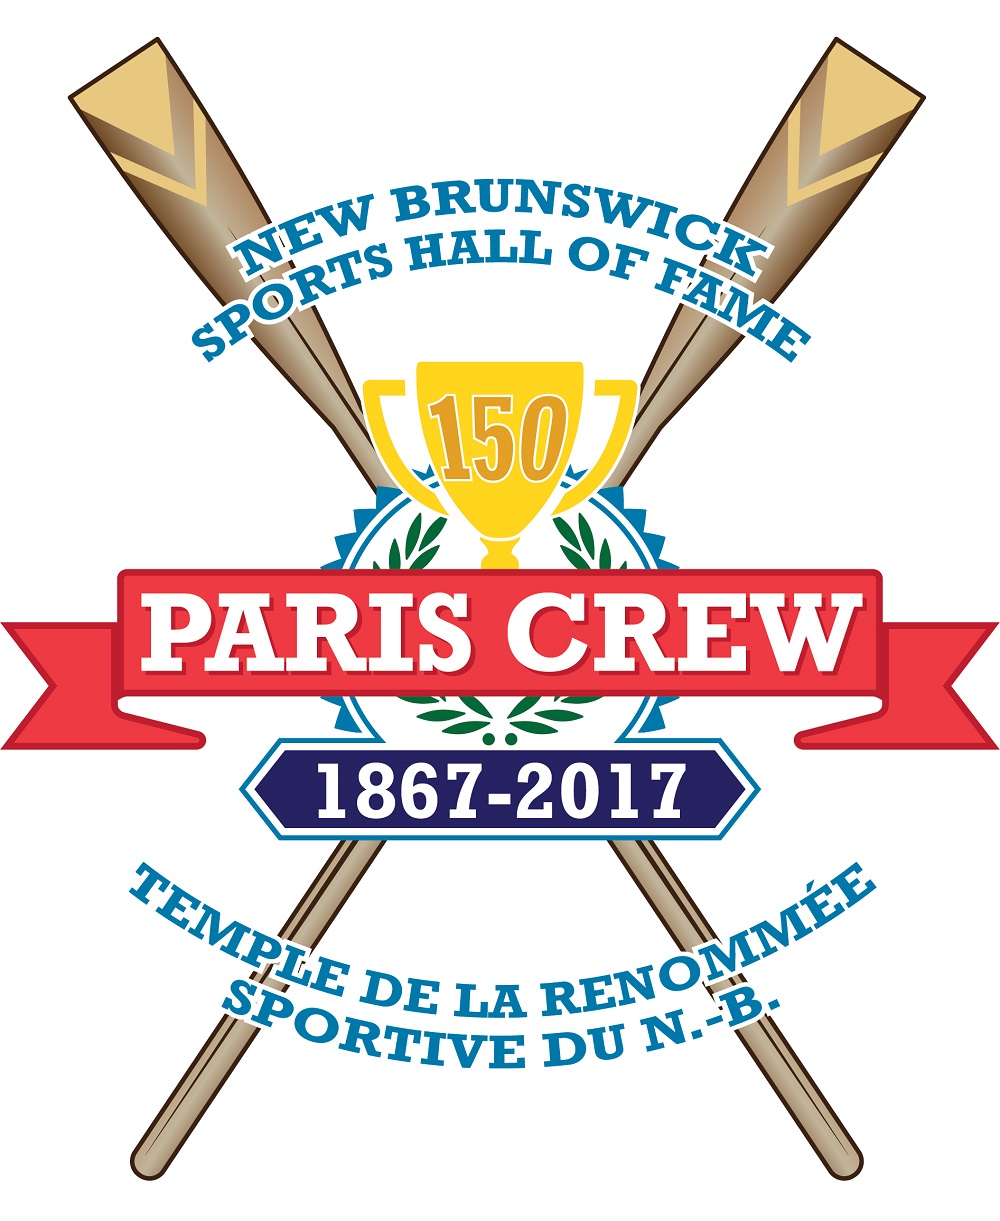 Commemorative 150th anniversary logo of the Paris Crew created and used by the New Brunswick Sports Hall of Fame. The colours and style used are similar to the New Brunswick Sports Hall logo, which was used for promotional purposes. The image is of two rowing oars positioned in the shape of an ex. Placed overtop is a crest with yellow trophy with 150 engraved on the front. There is a red ribbon on either side of the trophy with Paris Crew written on it and 1867 to 2017 on a blue pennant below. The bilingual name for the New Brunswick Sports Hall of Fame encircles the crest.